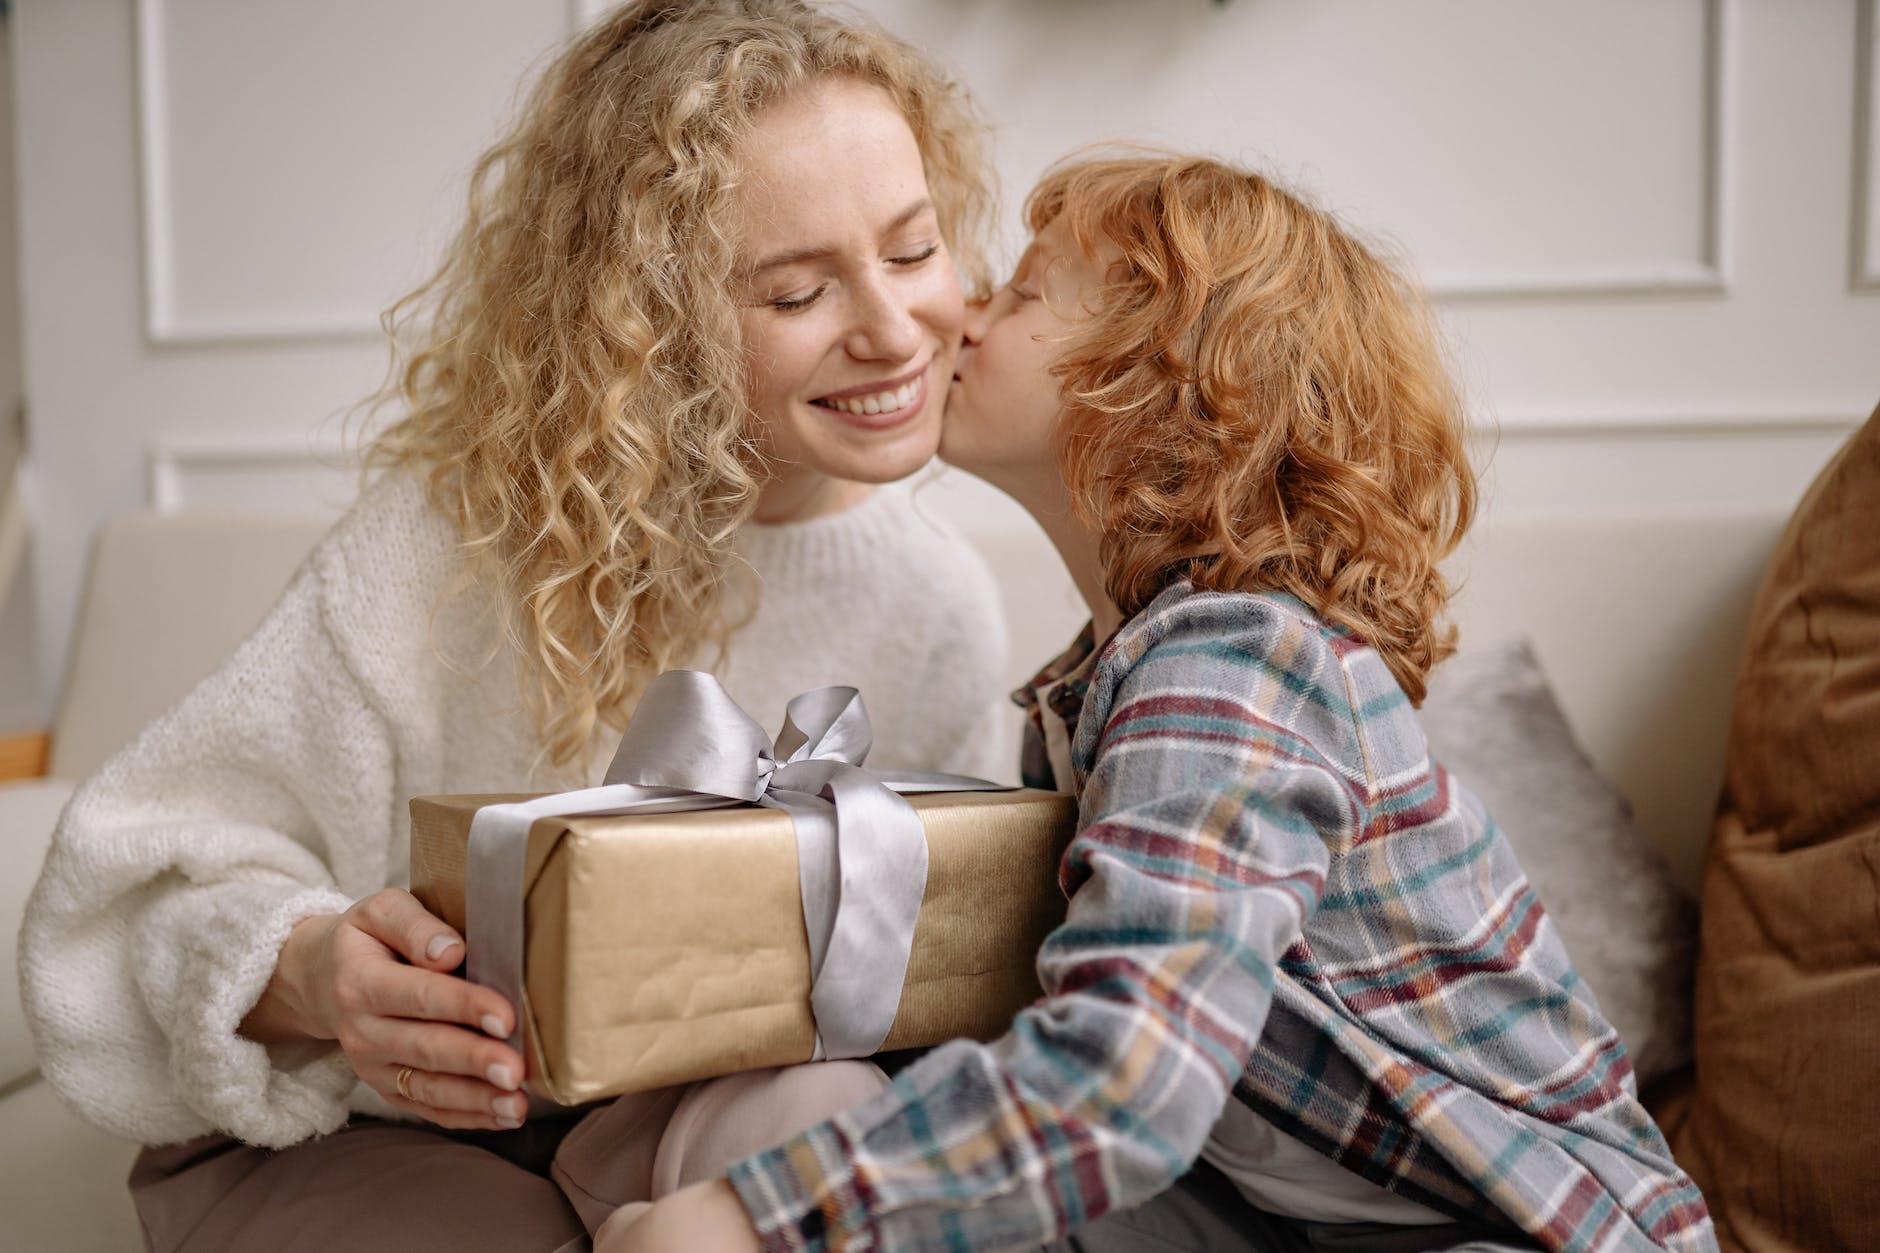 a boy in plaid shirt kissing a woman in white top holding a gift box